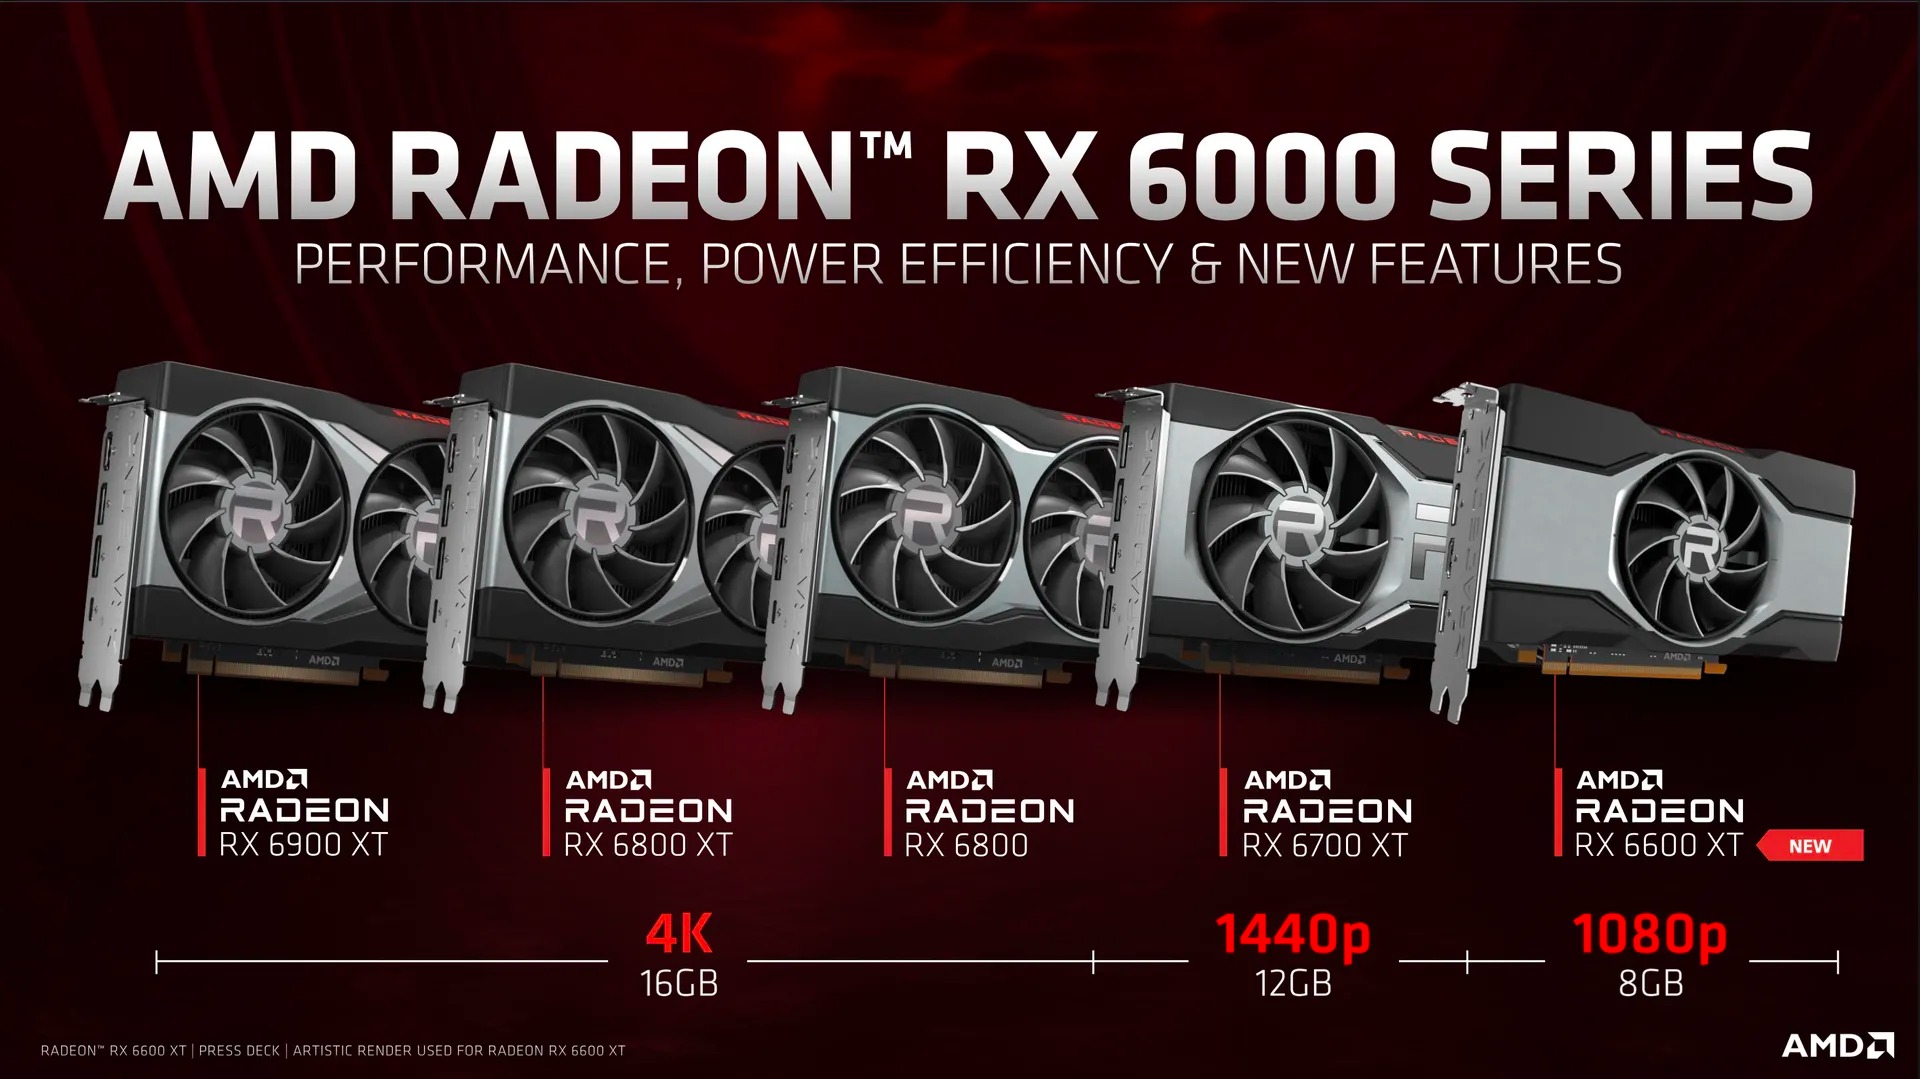 AMD Radeon RX 6600 XT with 2048 cores and 8GB G6 memory officially